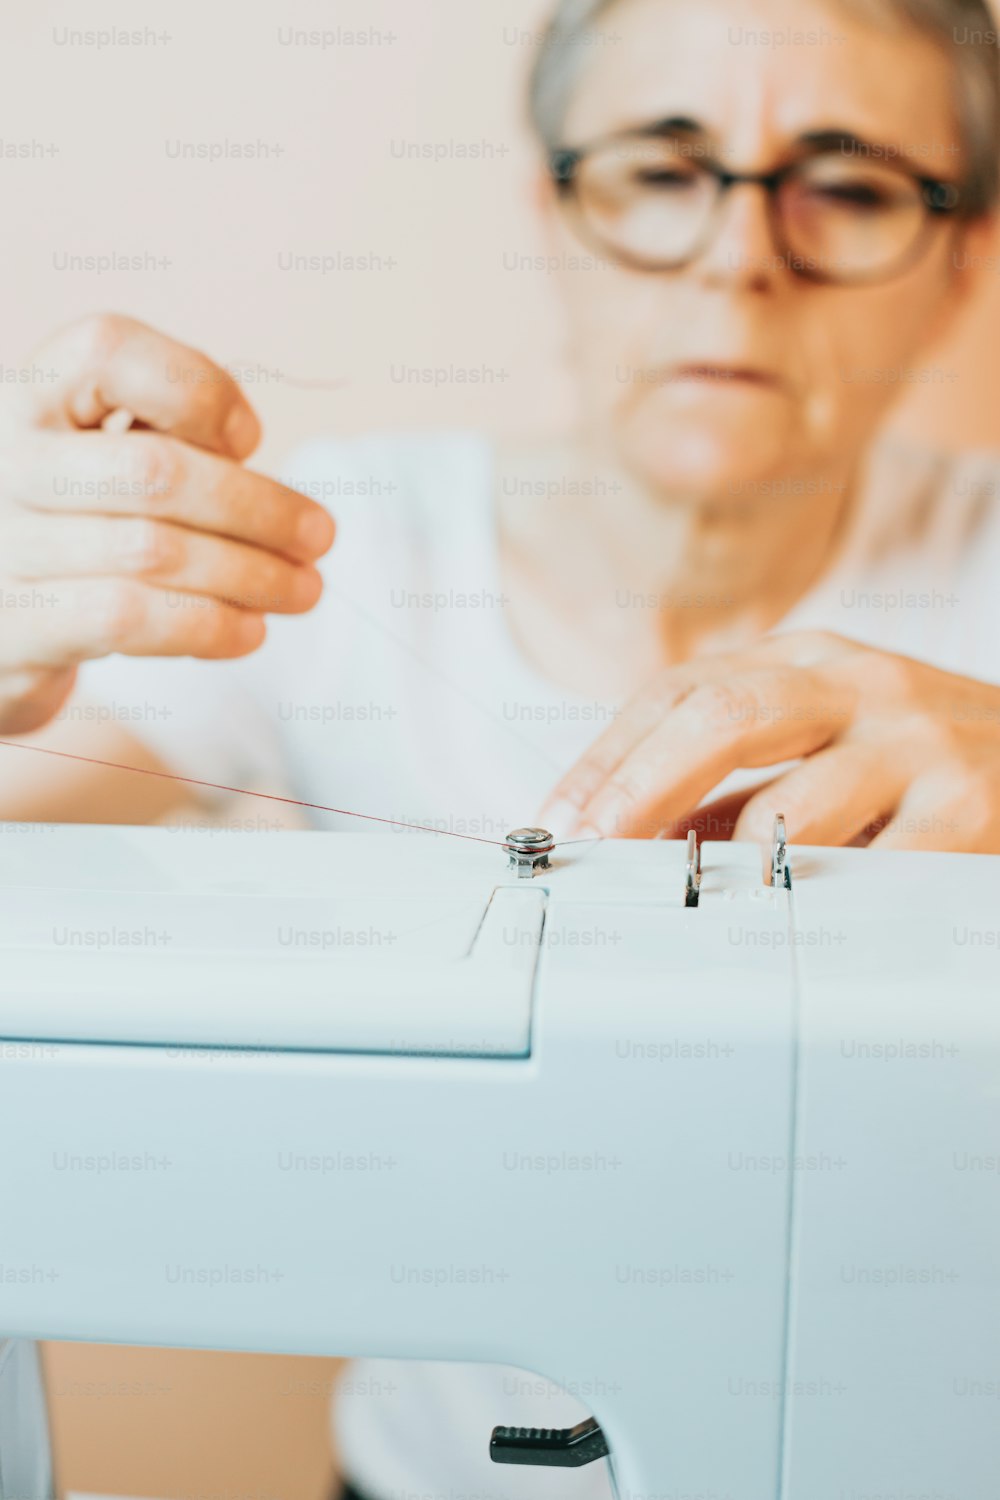 a woman is sewing on a sewing machine